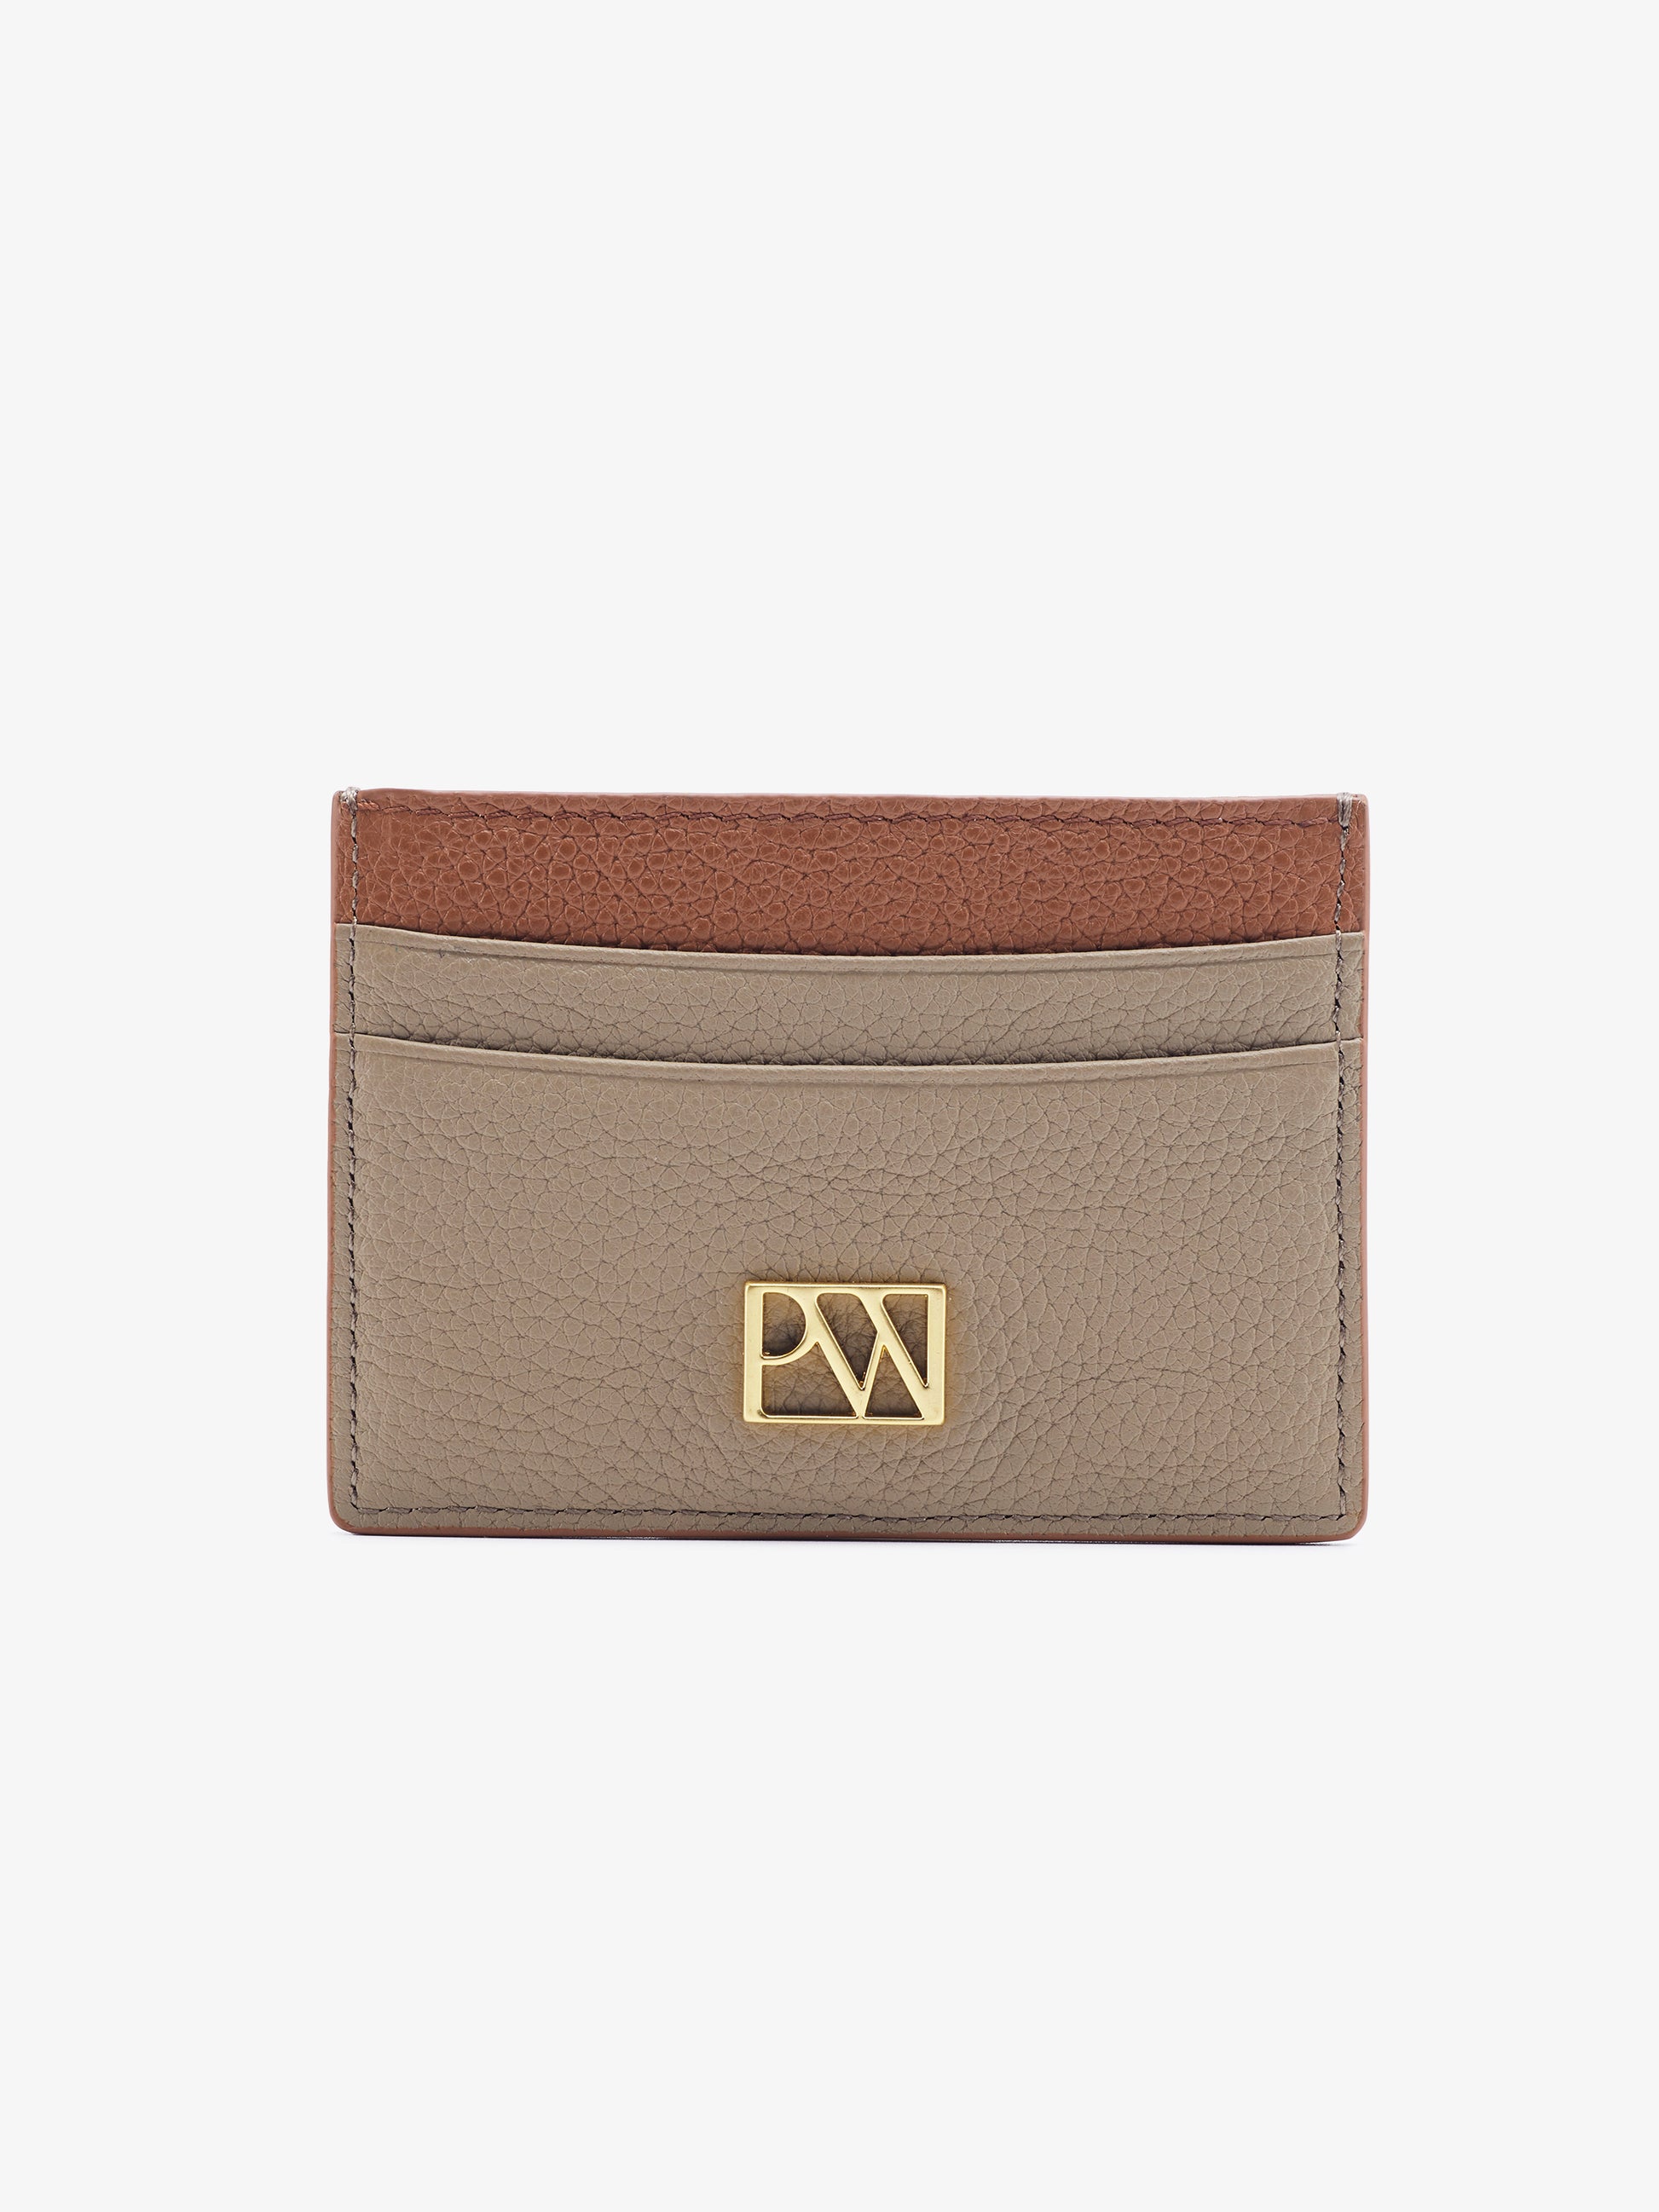 PW Card Holder in Taupe Brown | Parisa Wang | Featured